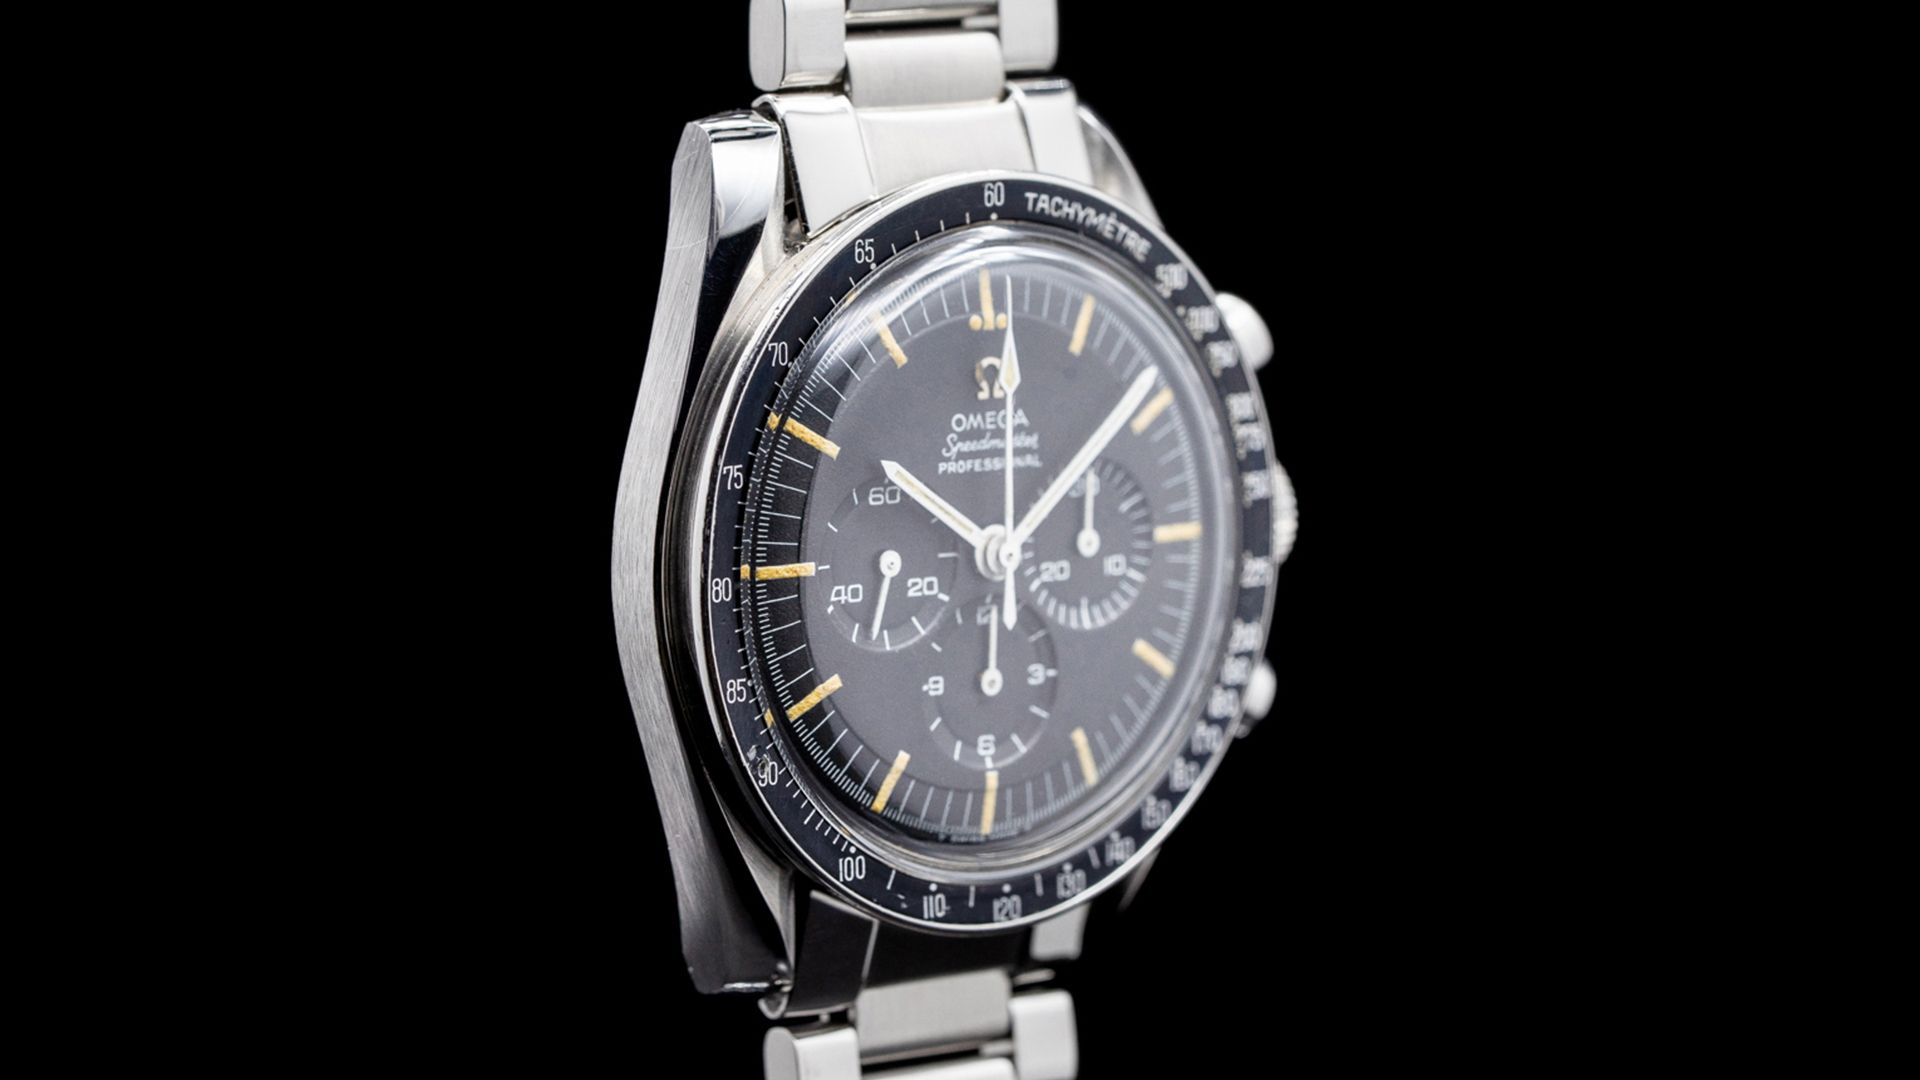 The Omega Speedmaster wrist watch, the same brand that Buzz Aldrin wore on the moon.